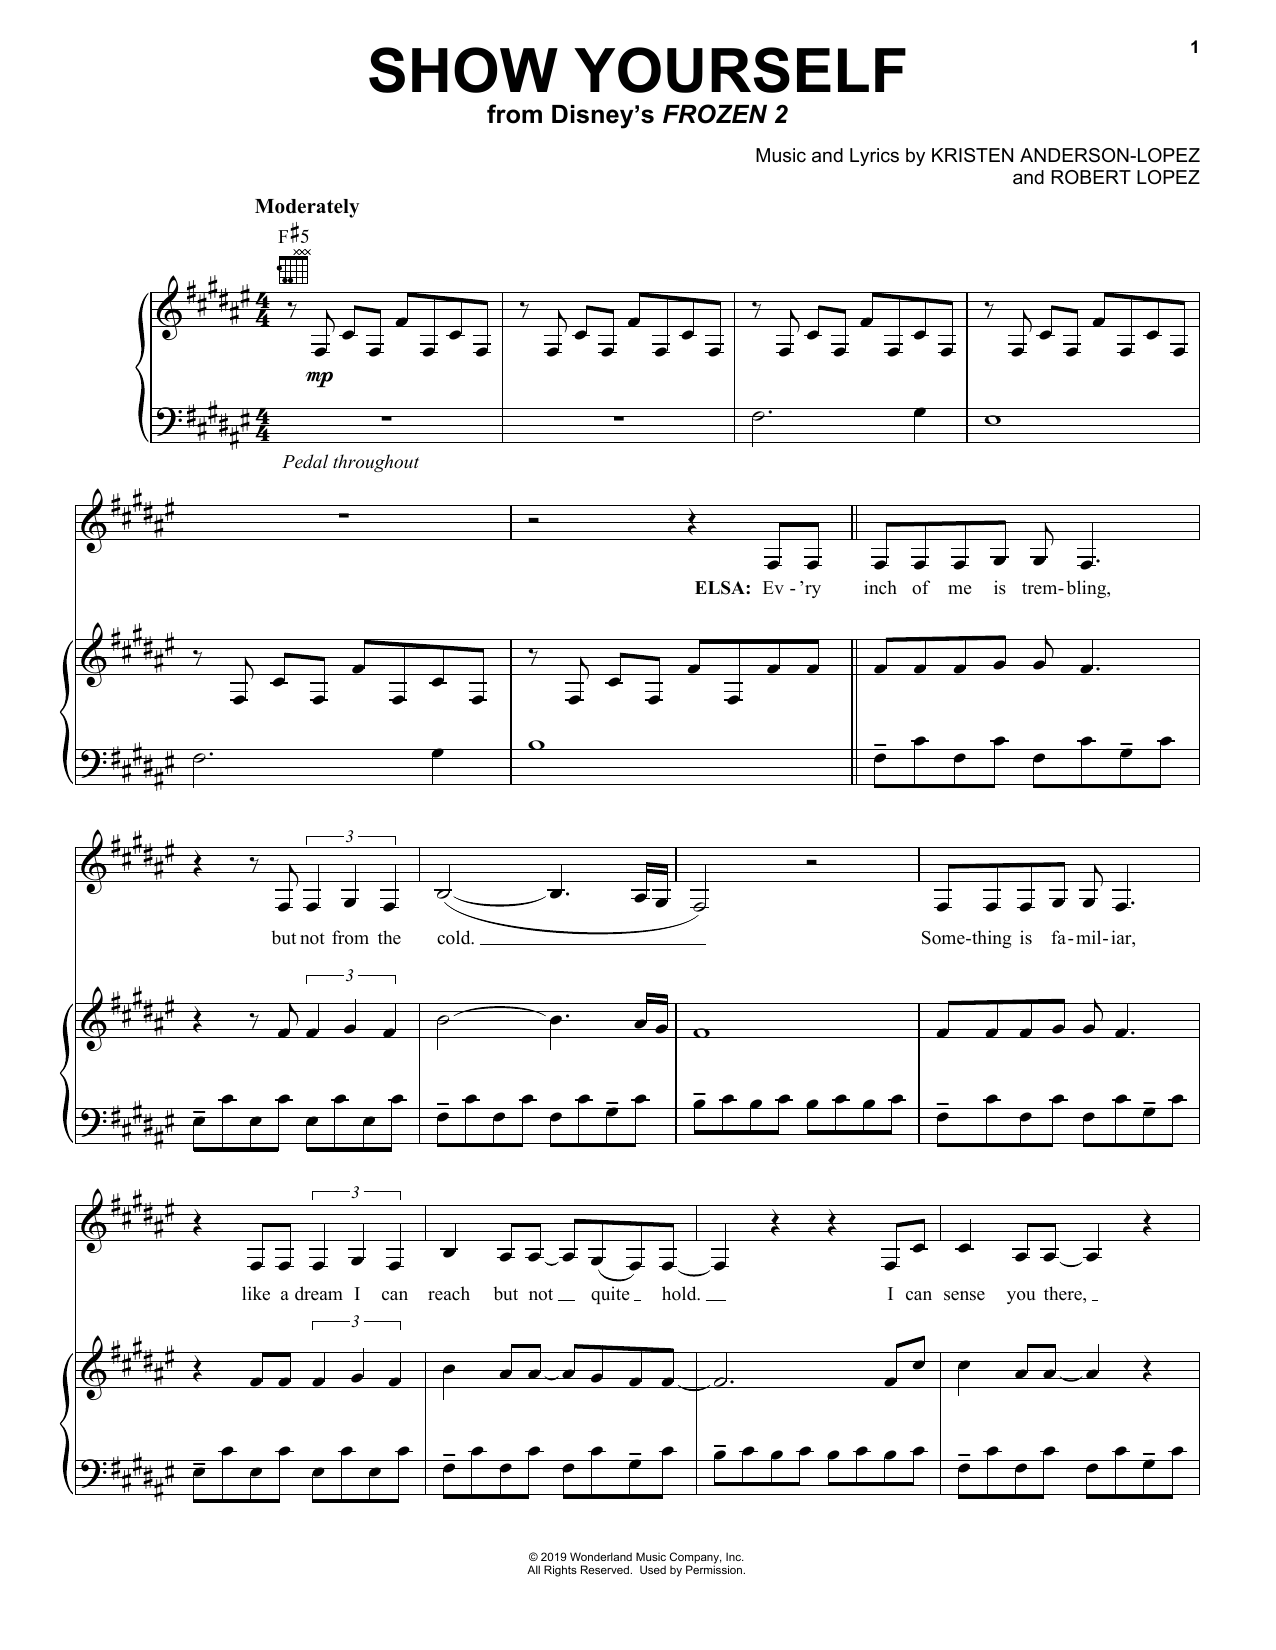 Idina Menzel and Evan Rachel Wood Show Yourself (from Disney's Frozen 2) sheet music notes printable PDF score